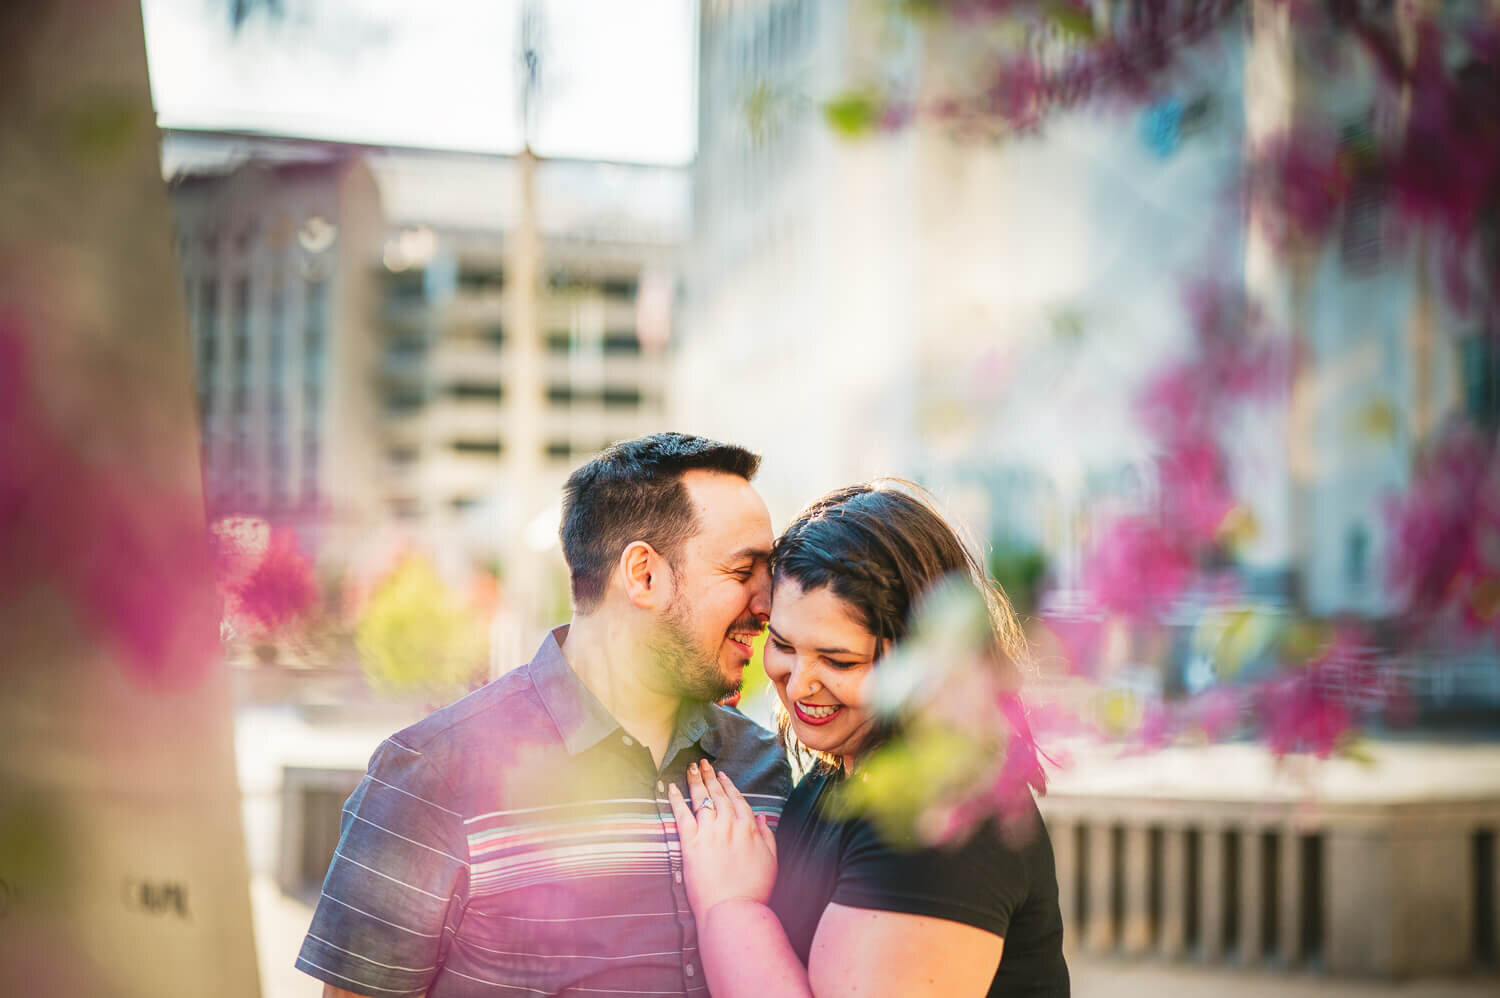 st louis city garden engagement session becky and michael-9.jpg